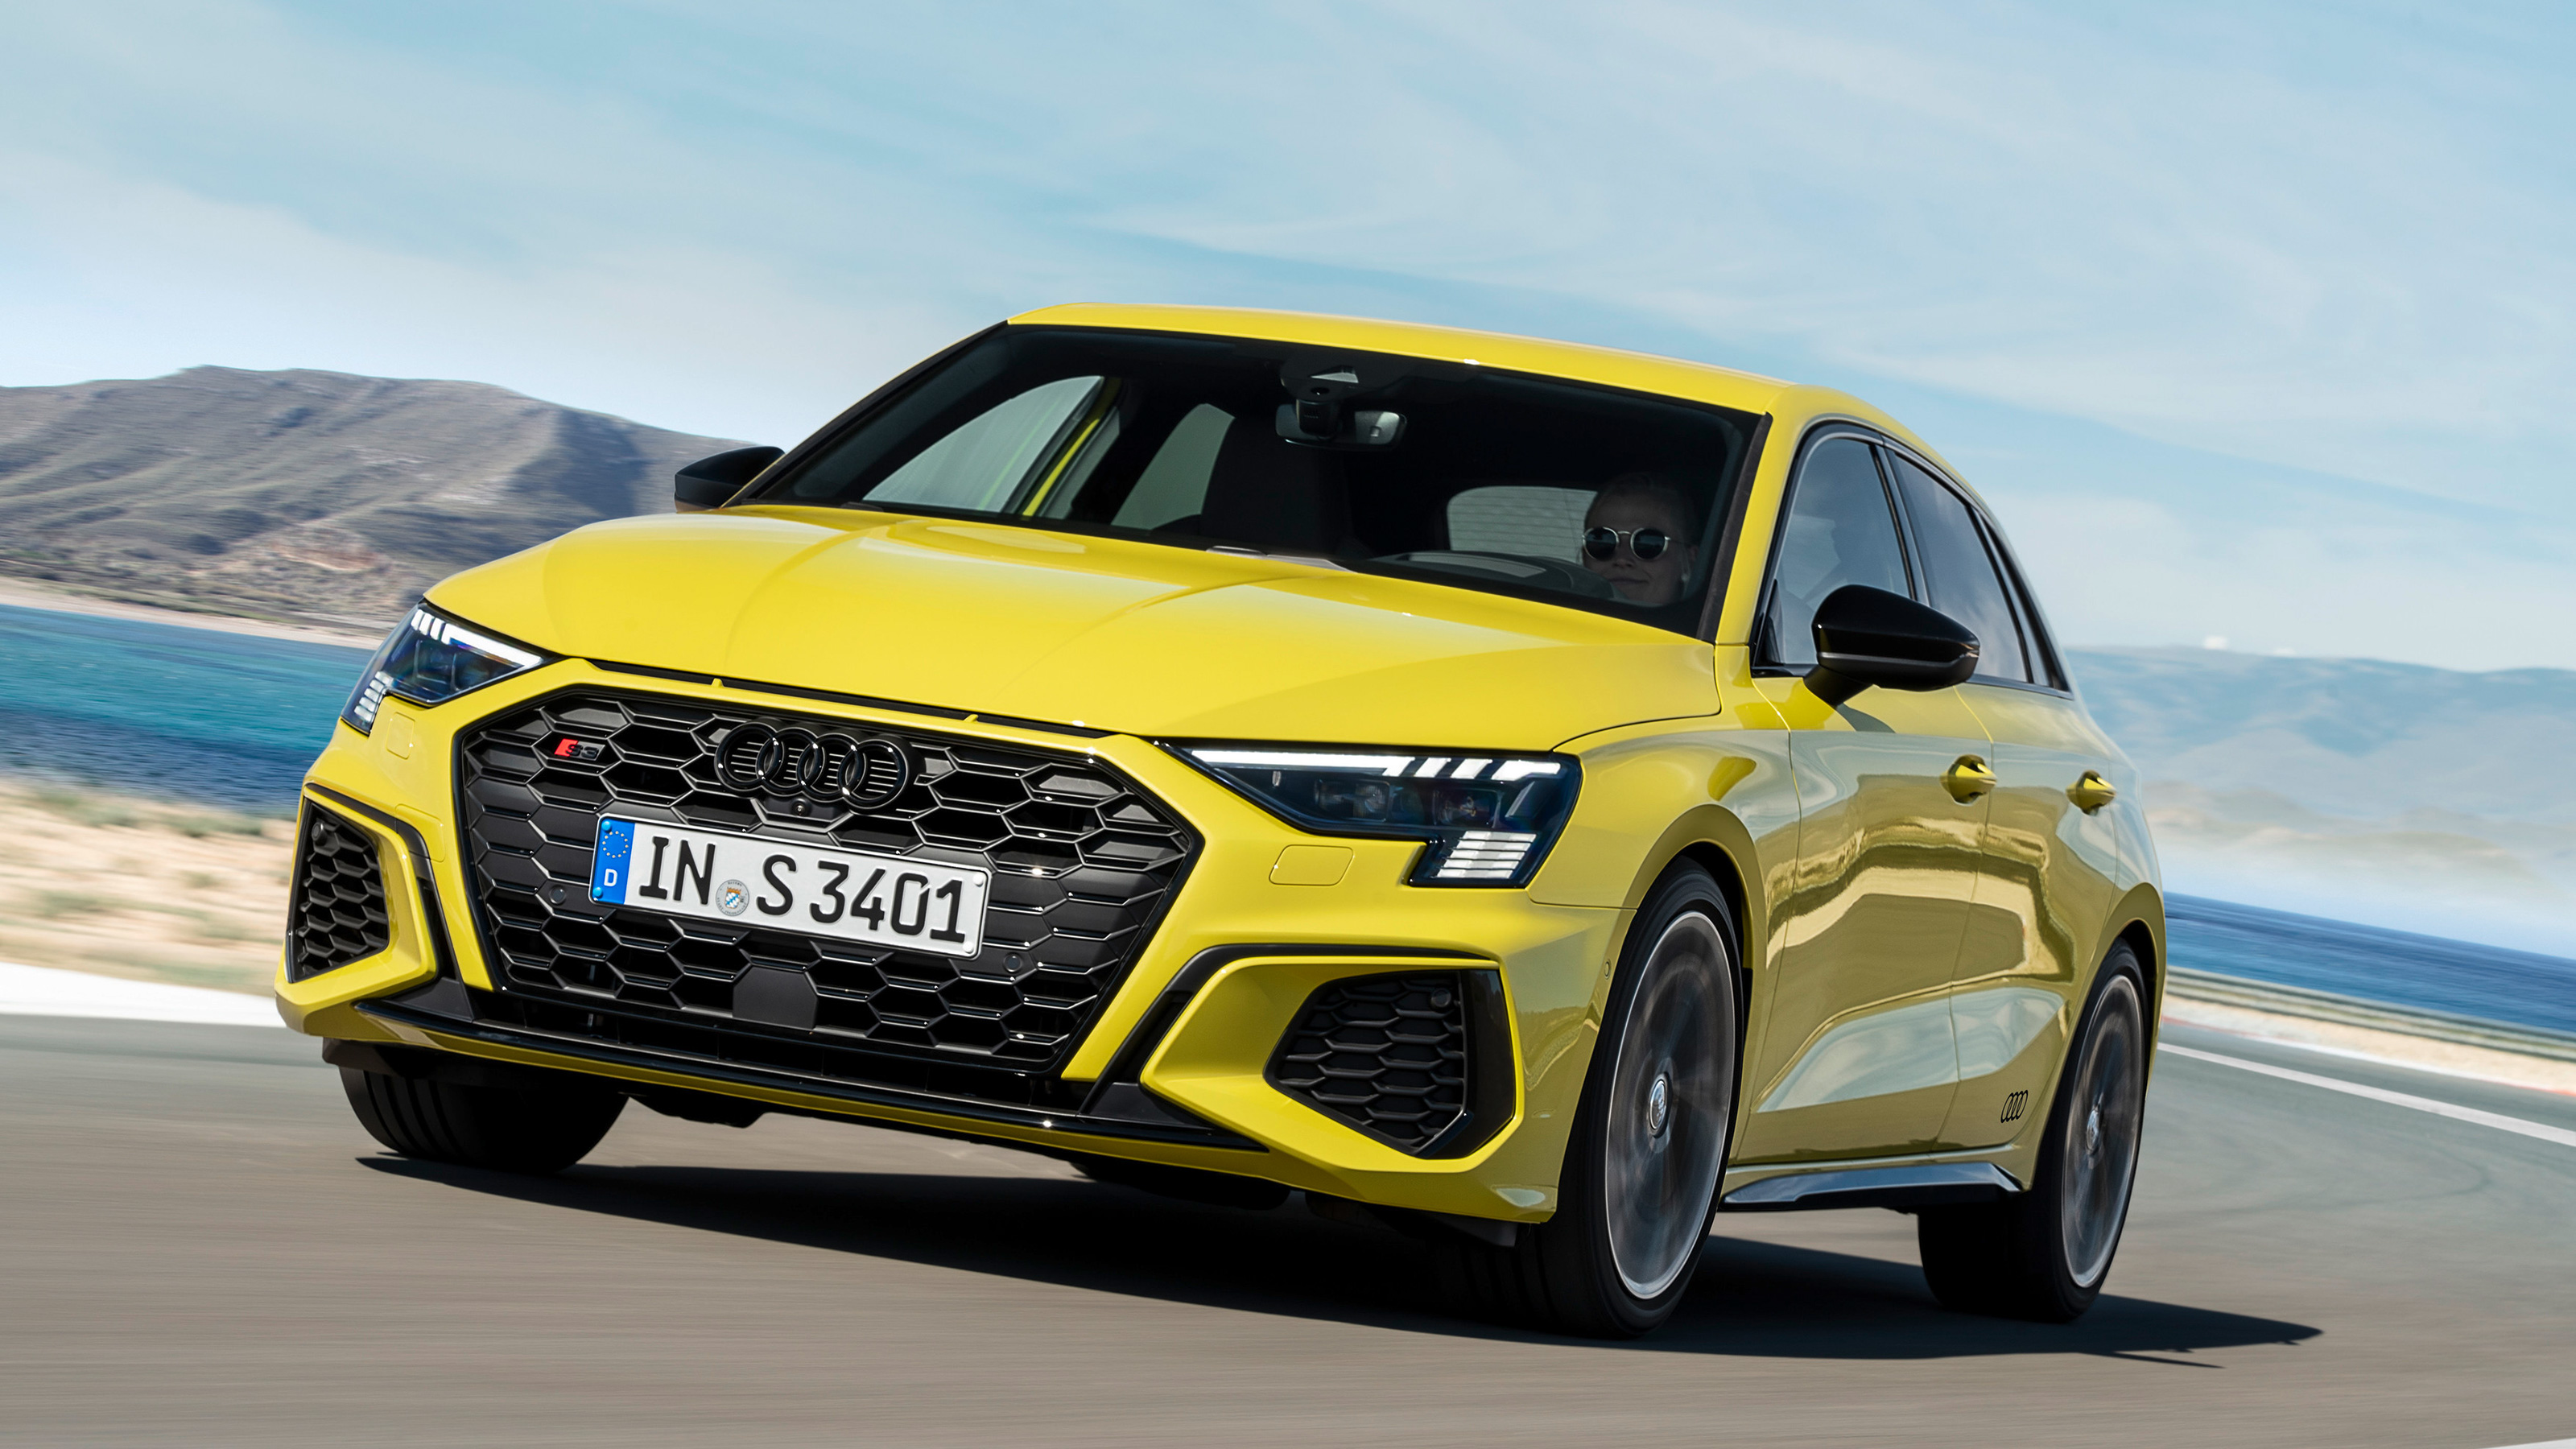 New 2020 Audi S3 Sportback blasts in with 306bhp Auto Express